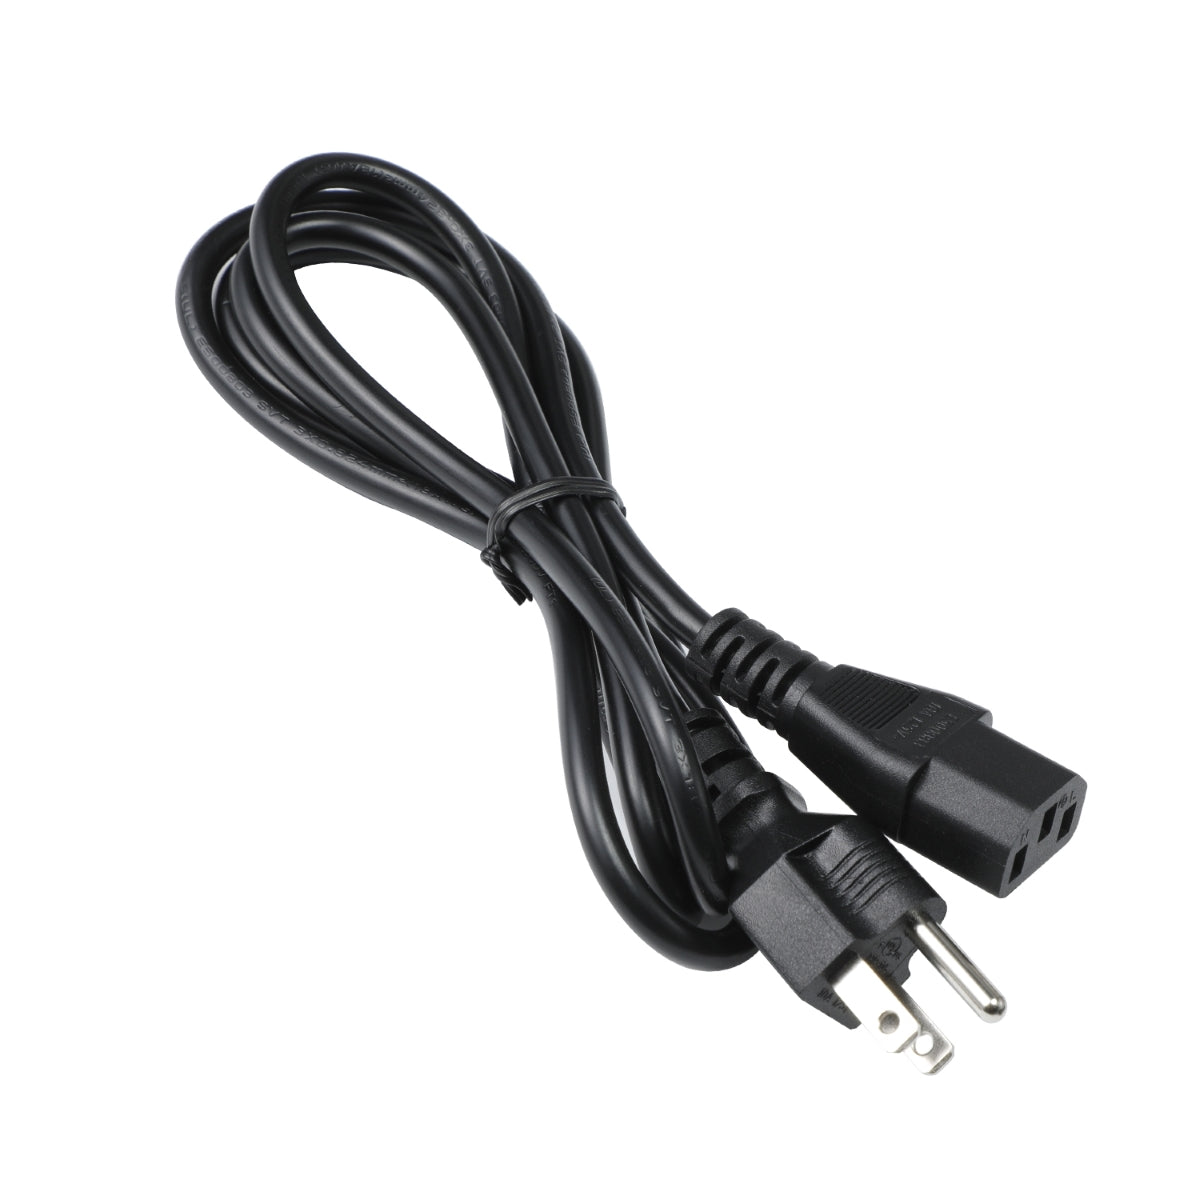 Power Cord for Acer KG251Q Monitor.